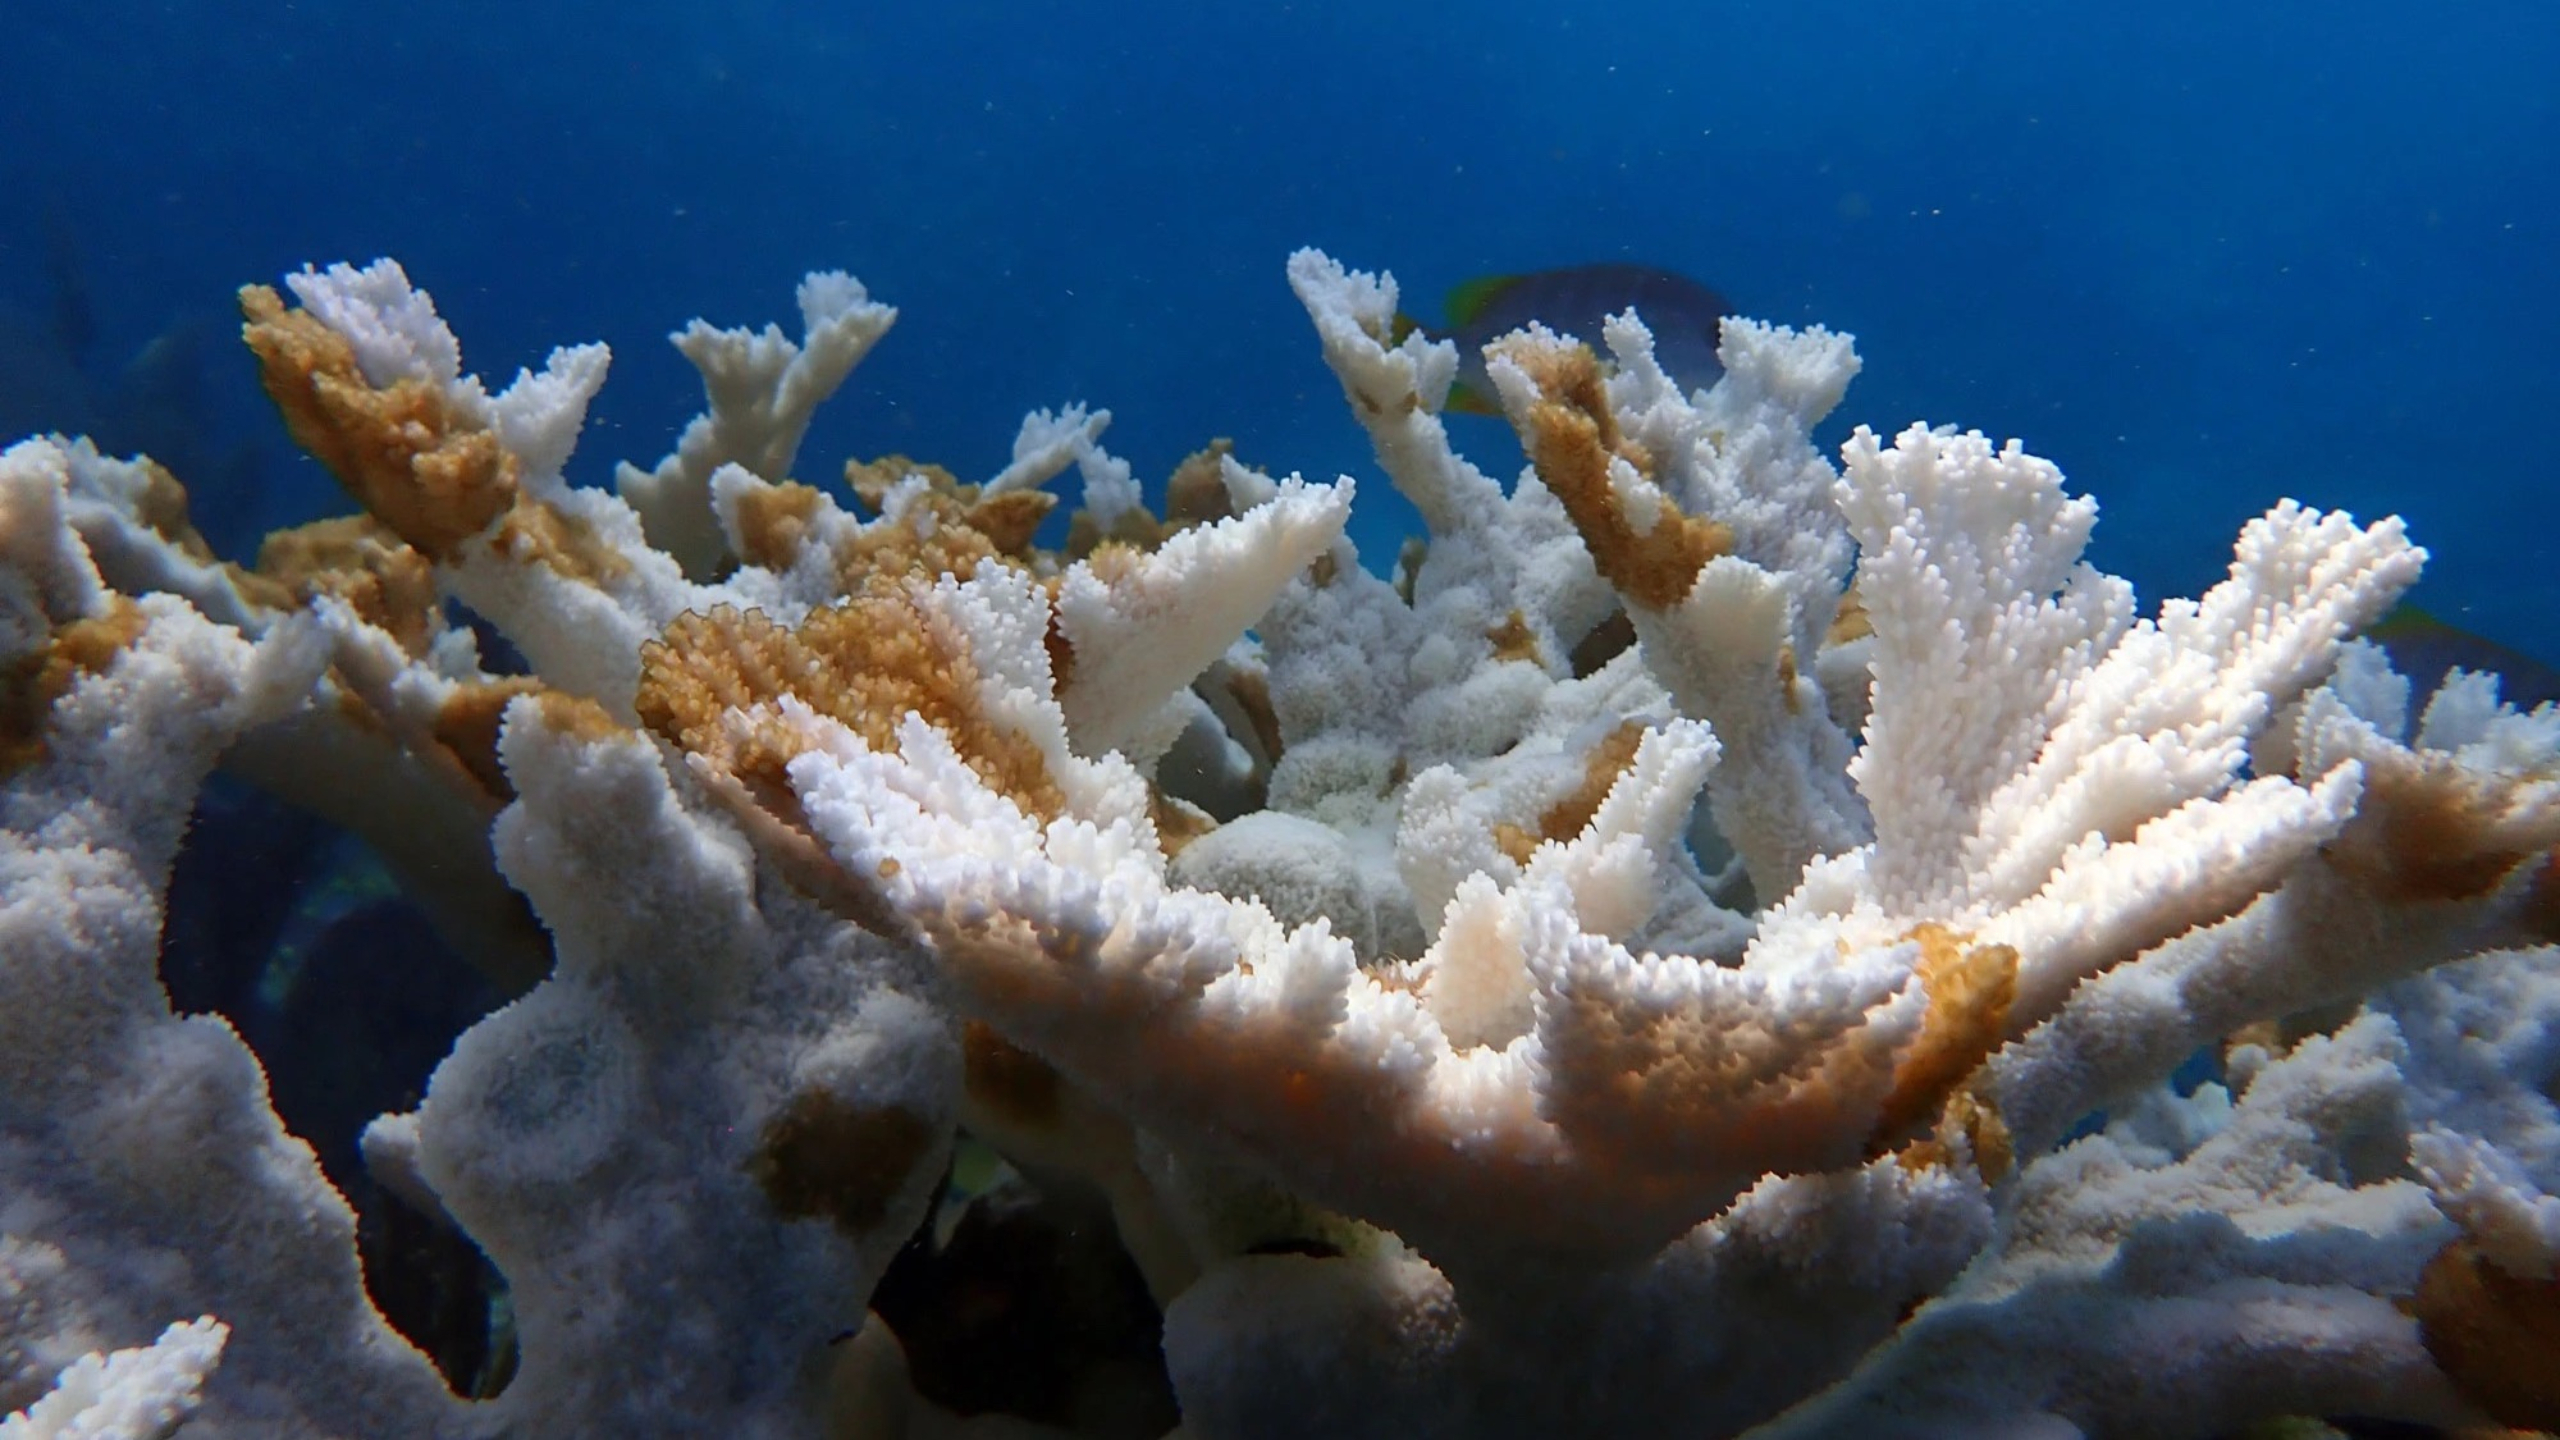 Mass coral reef bleaching in Florida as ocean temperatures hit 100 degrees